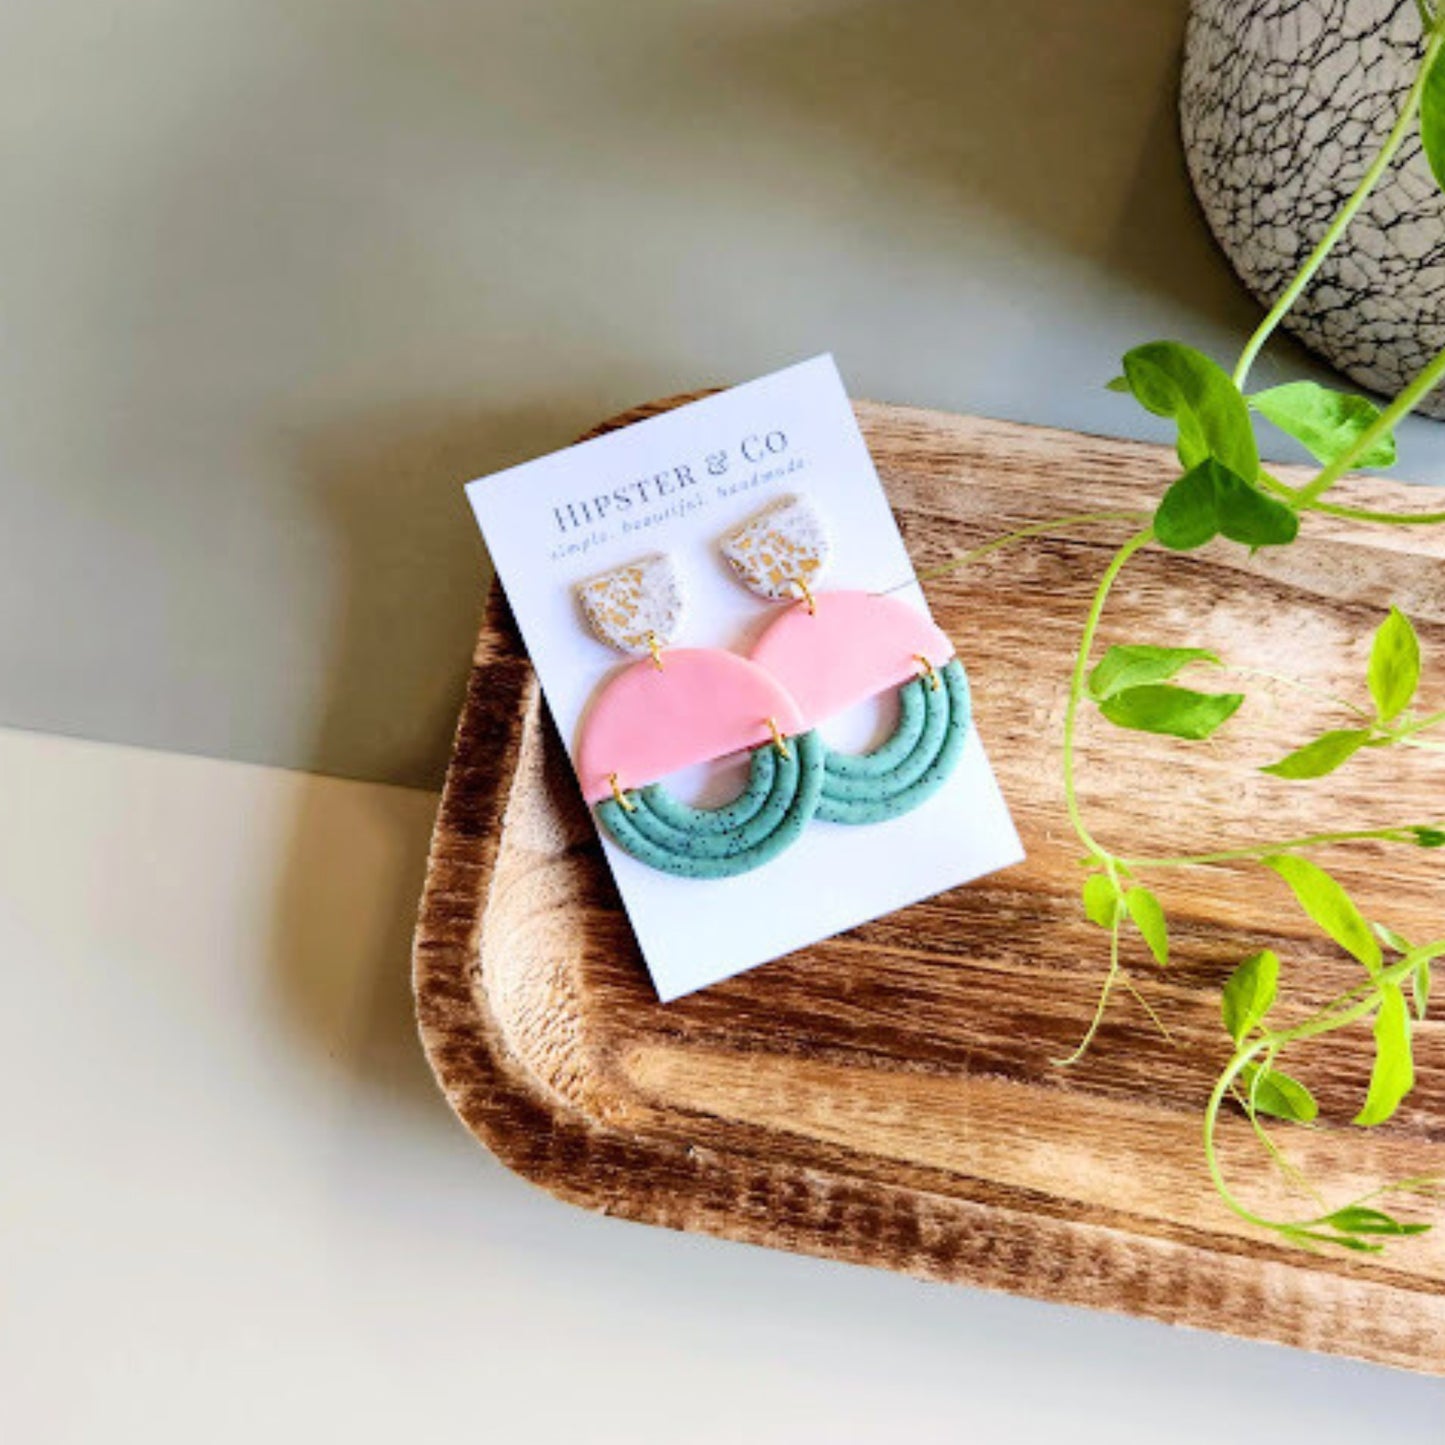 The Eliana Color Block Polymer Clay Dangle Earrings in Pink and Mint